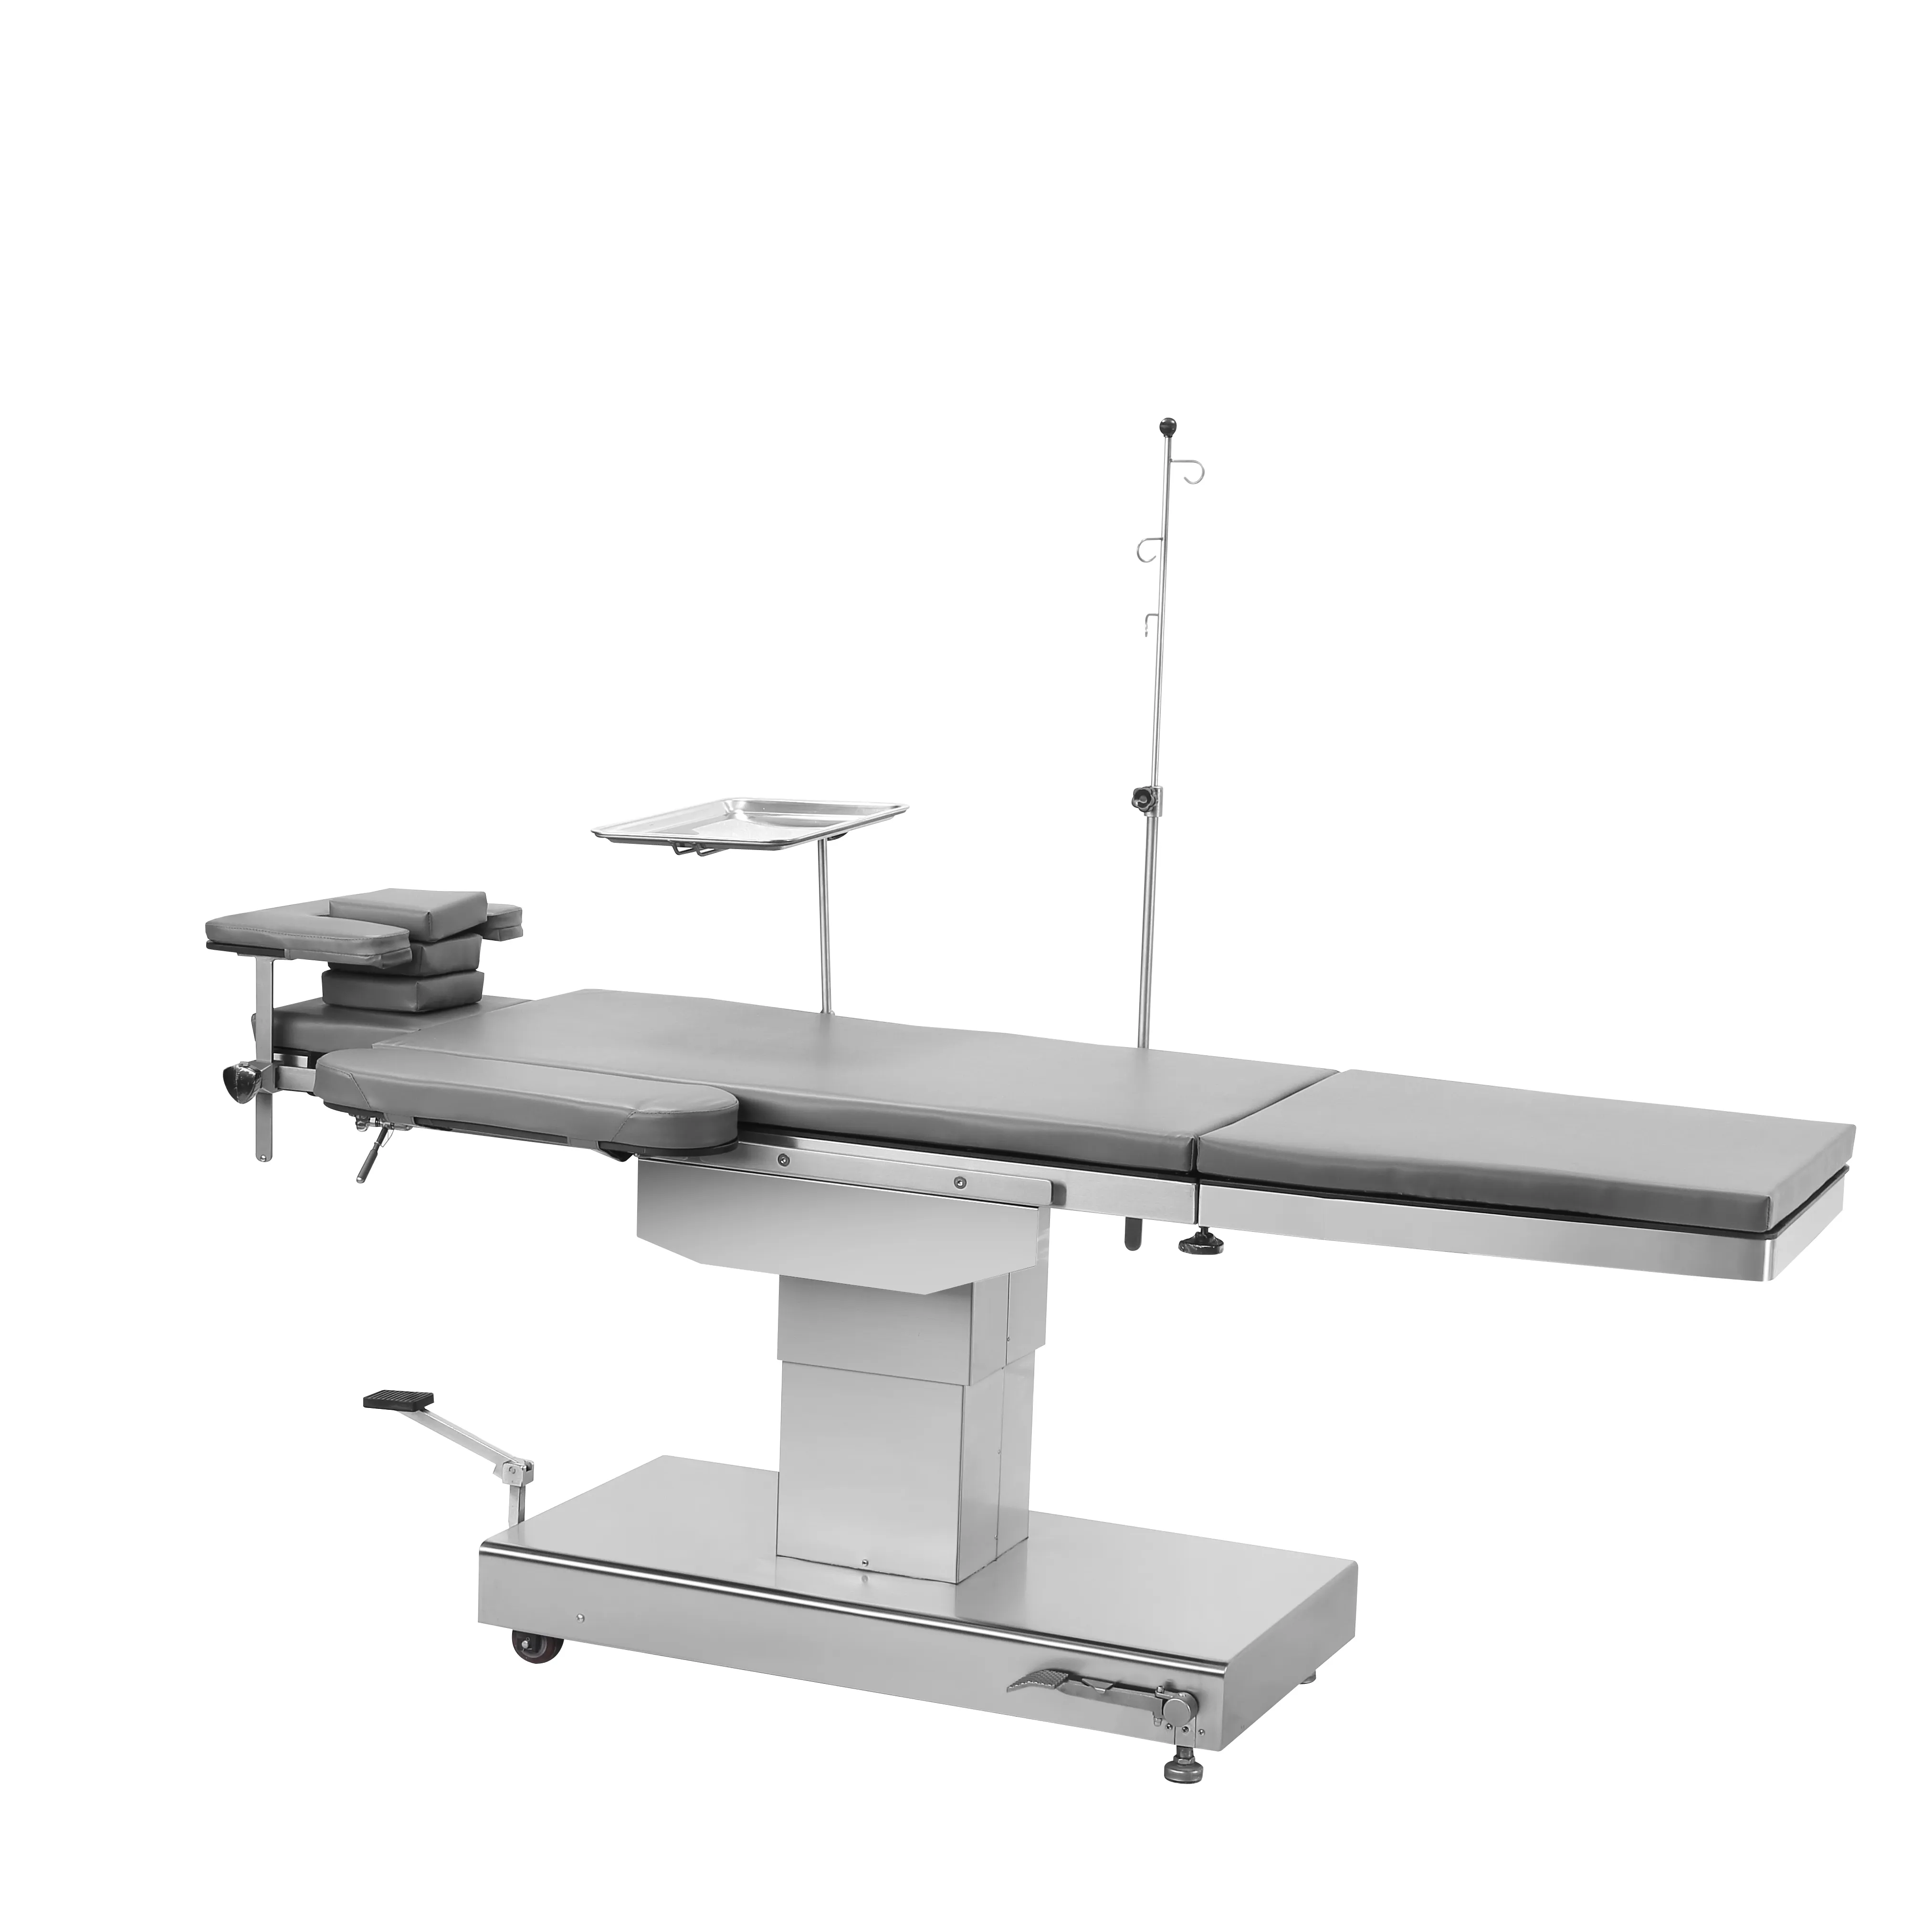 2000x530x 240-500 mm Hydraulic Operation Table Ophthalmological Operating Table